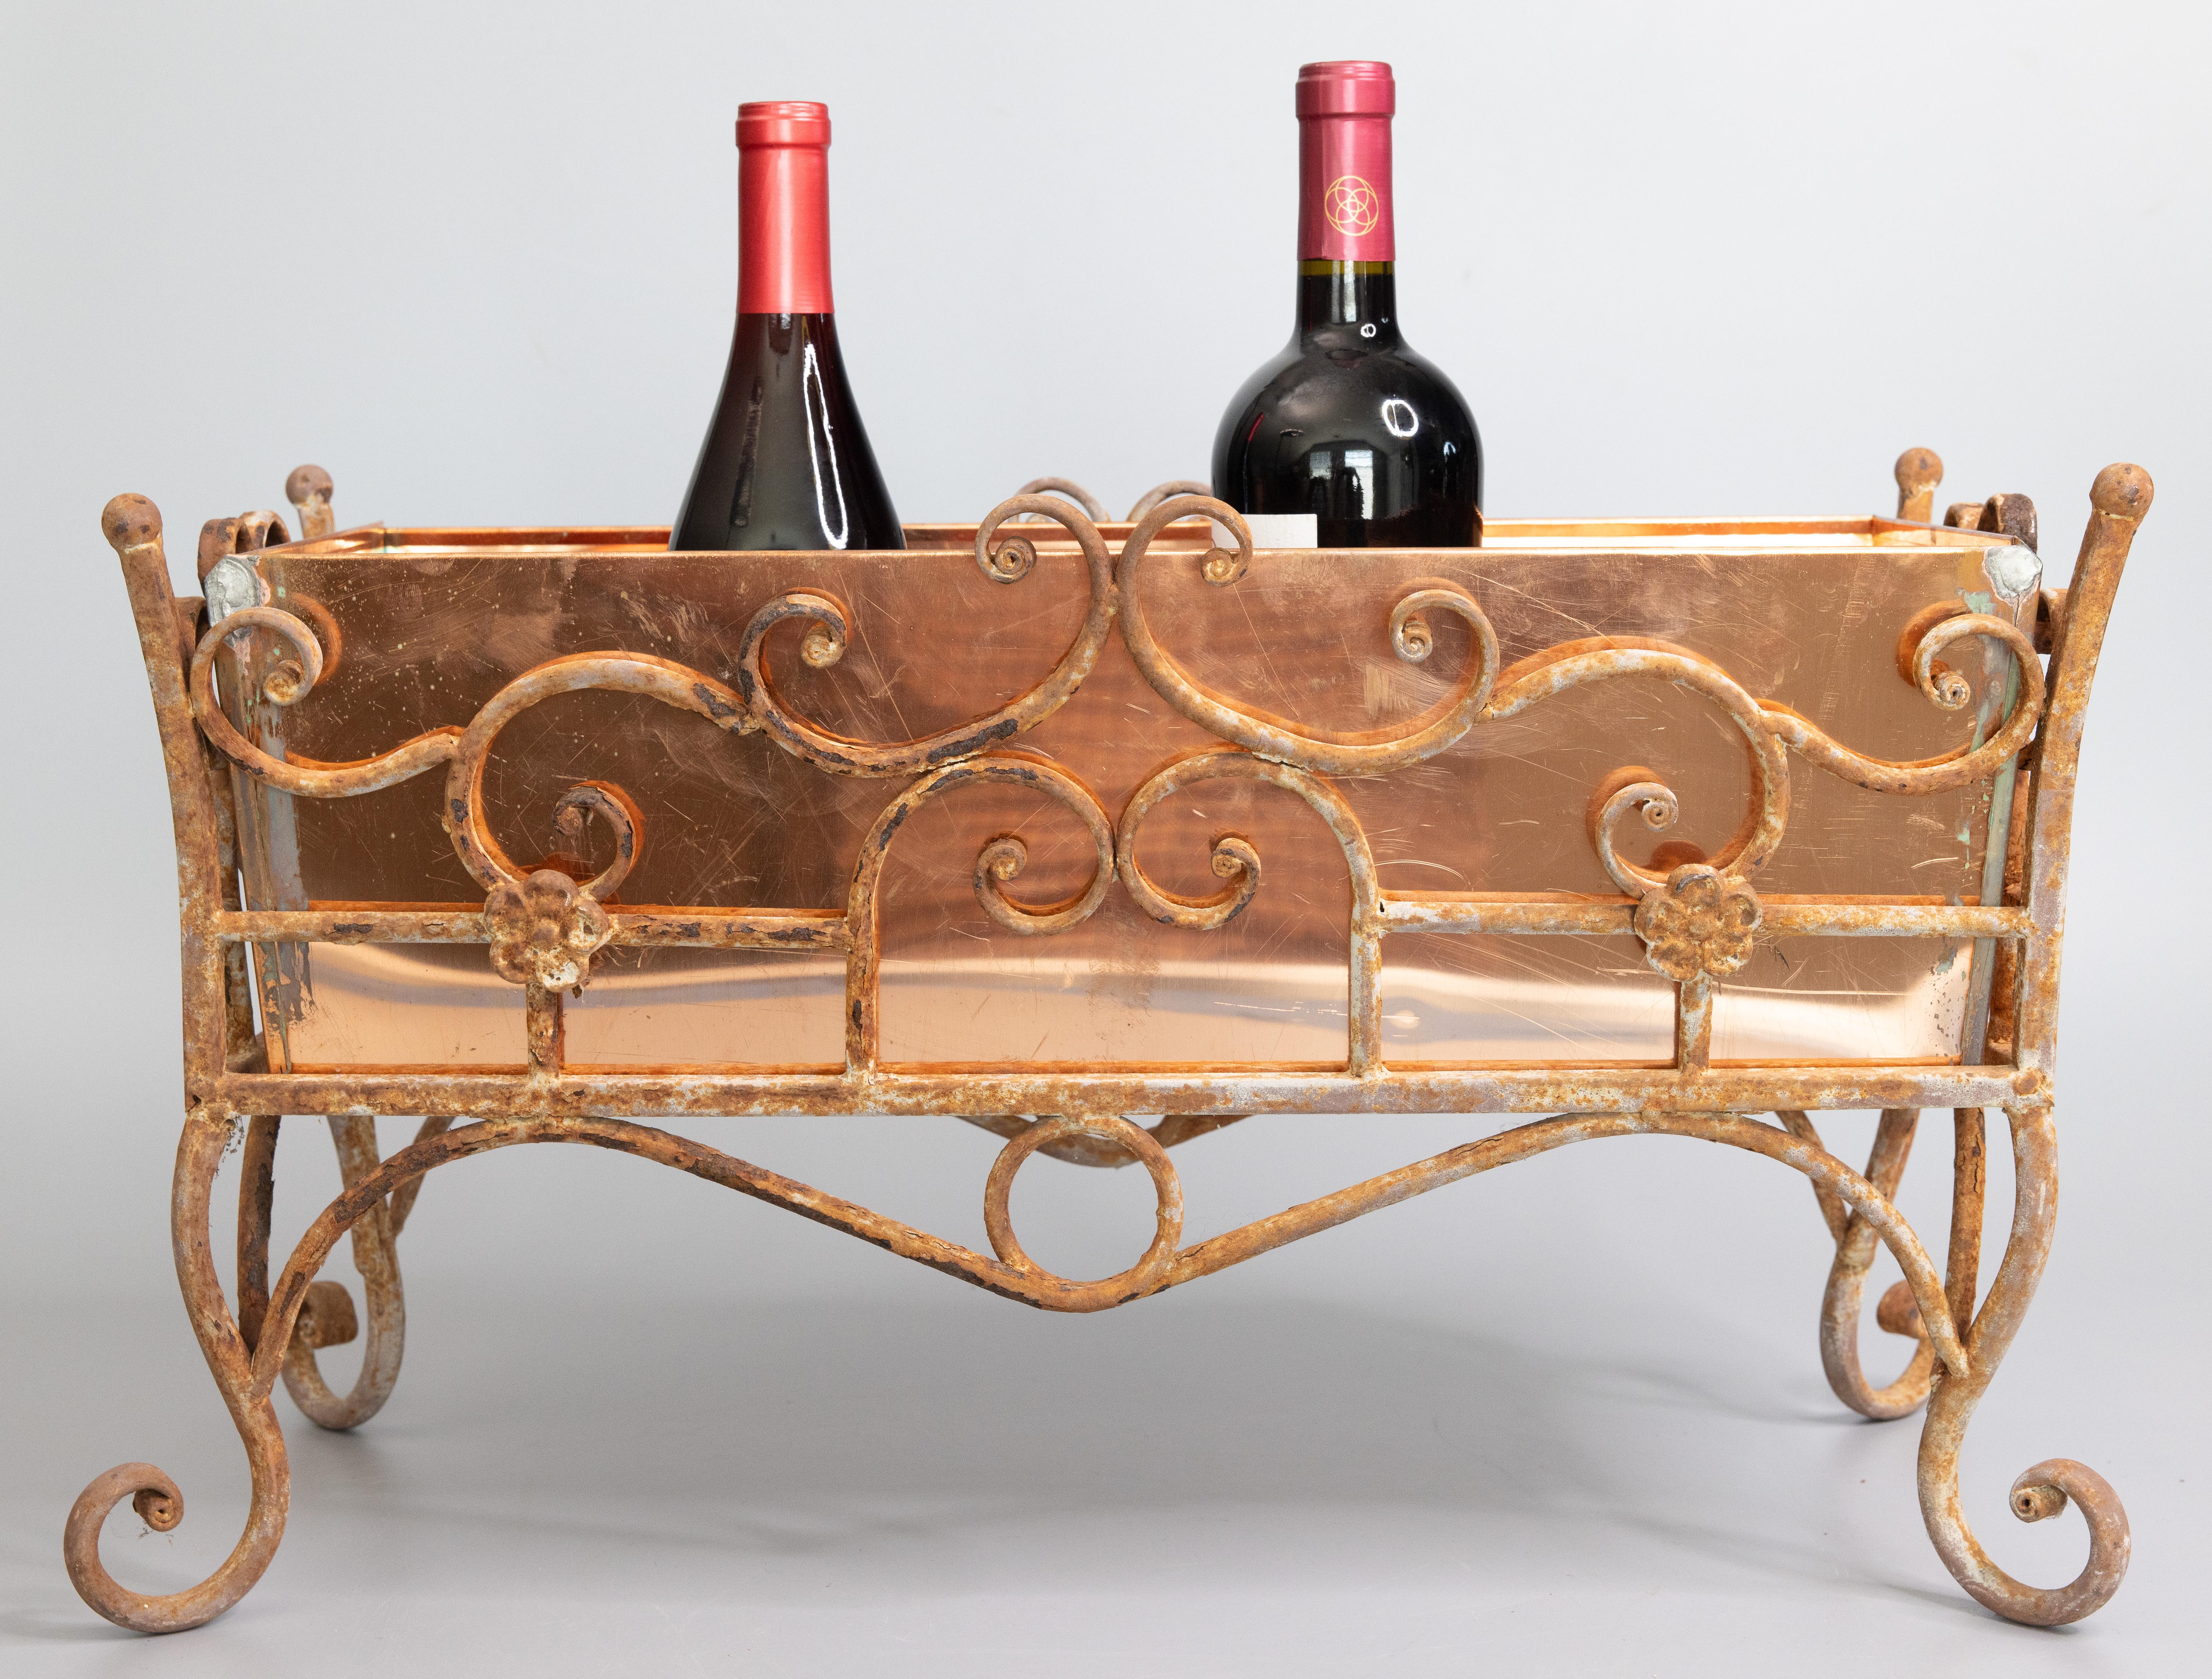 19th Century French Wrought Iron Jardiniere Wine Cooler With Custom Copper Liner For Sale 8